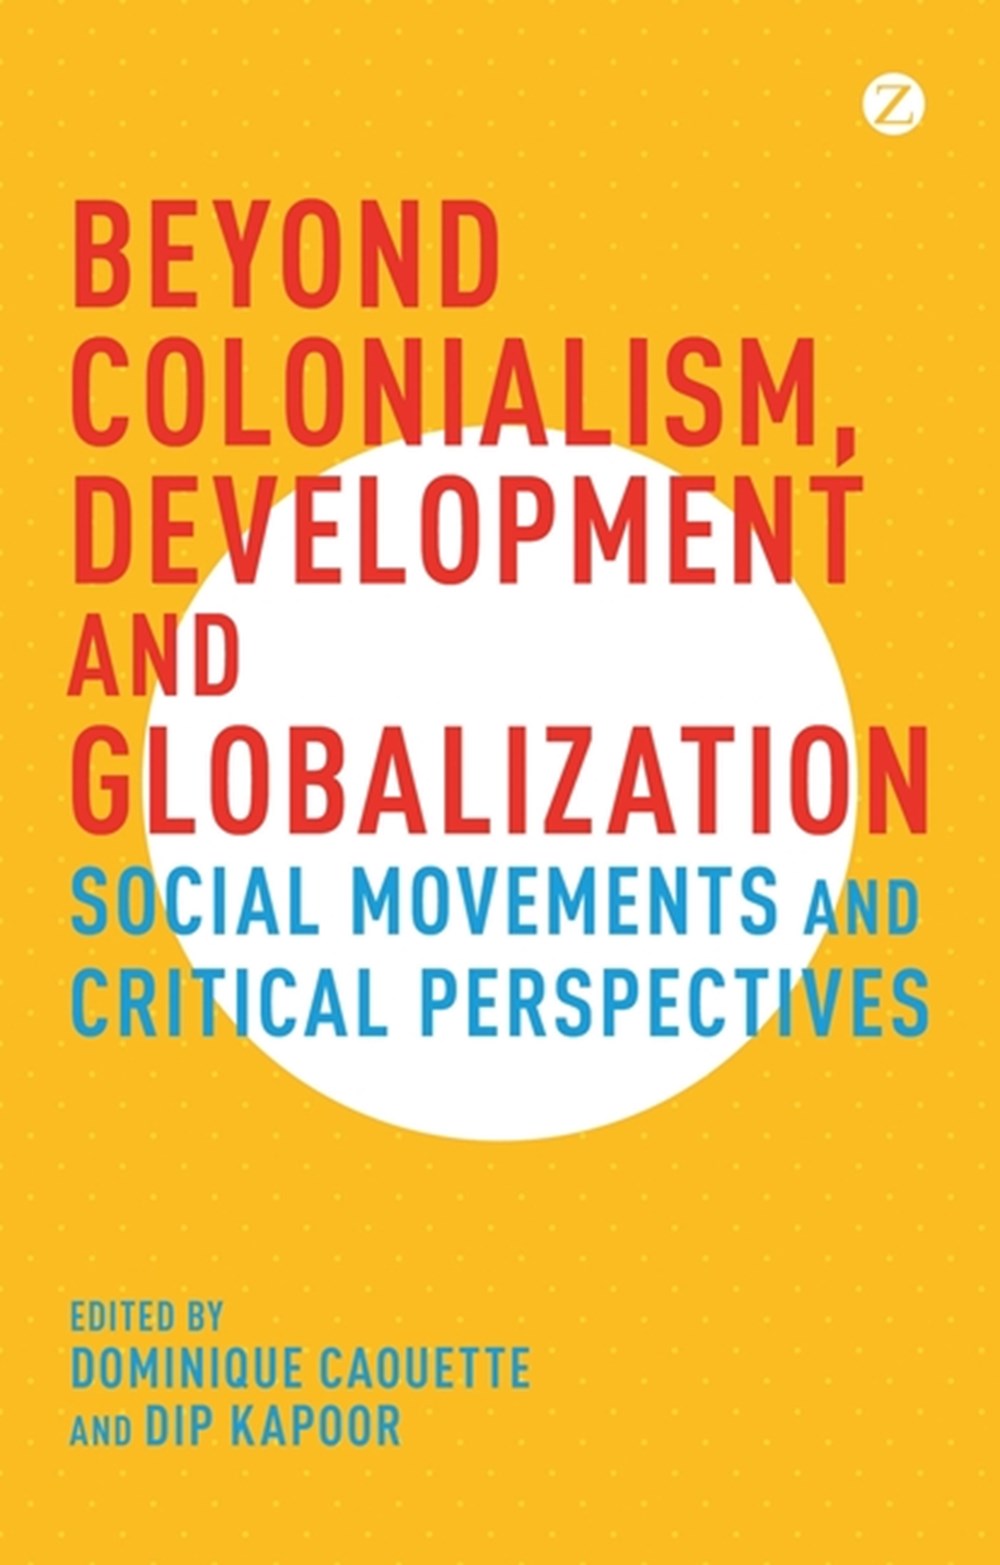 Beyond Colonialism, Development and Globalization Social Movements and Critical Perspectives